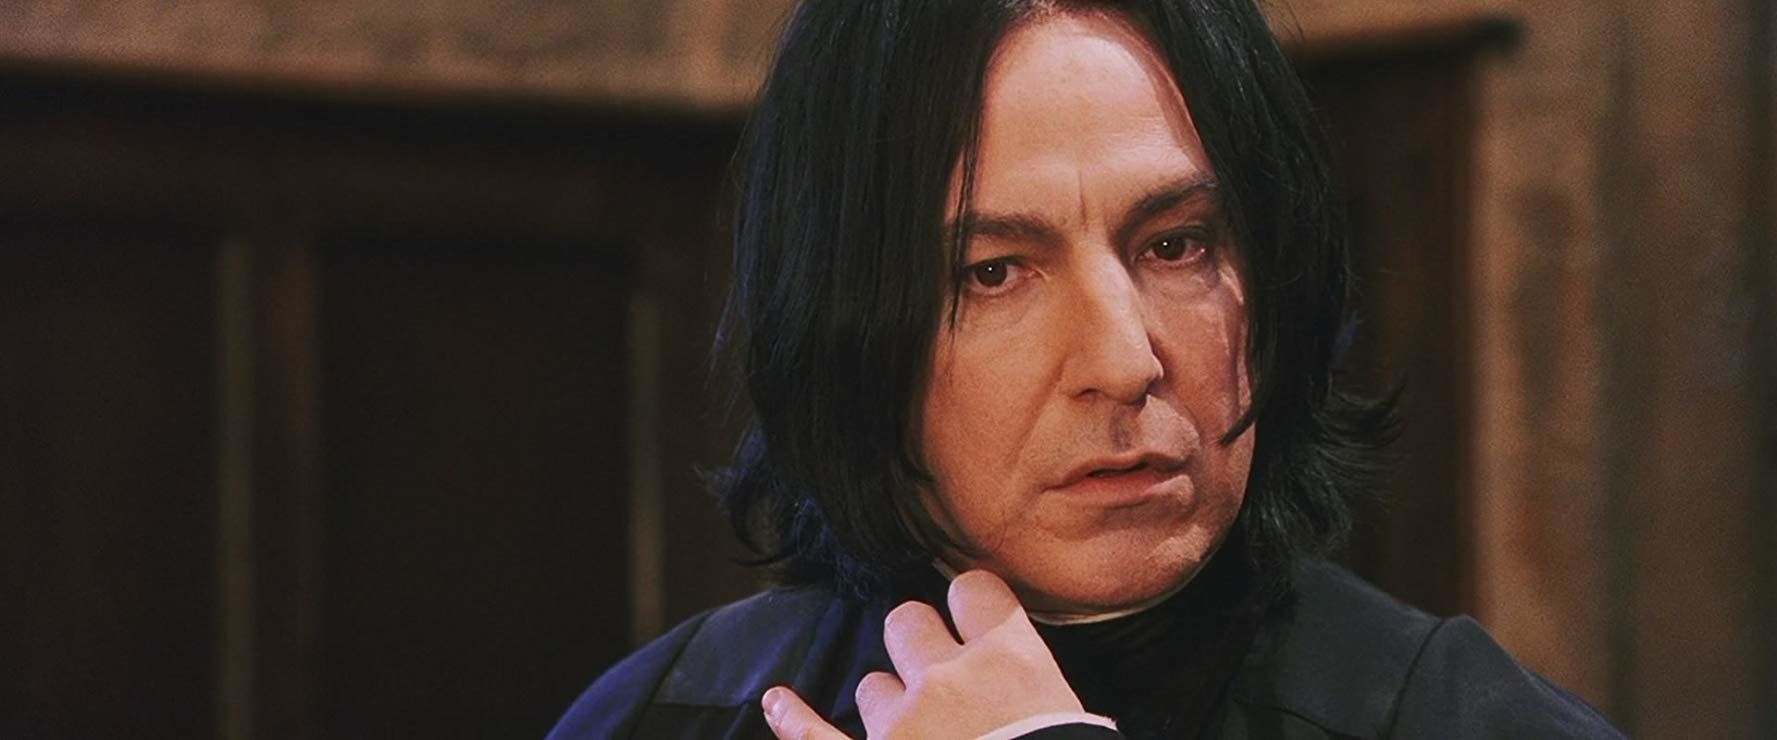 Snape, Harry Potter and the Sorcerer's Stone